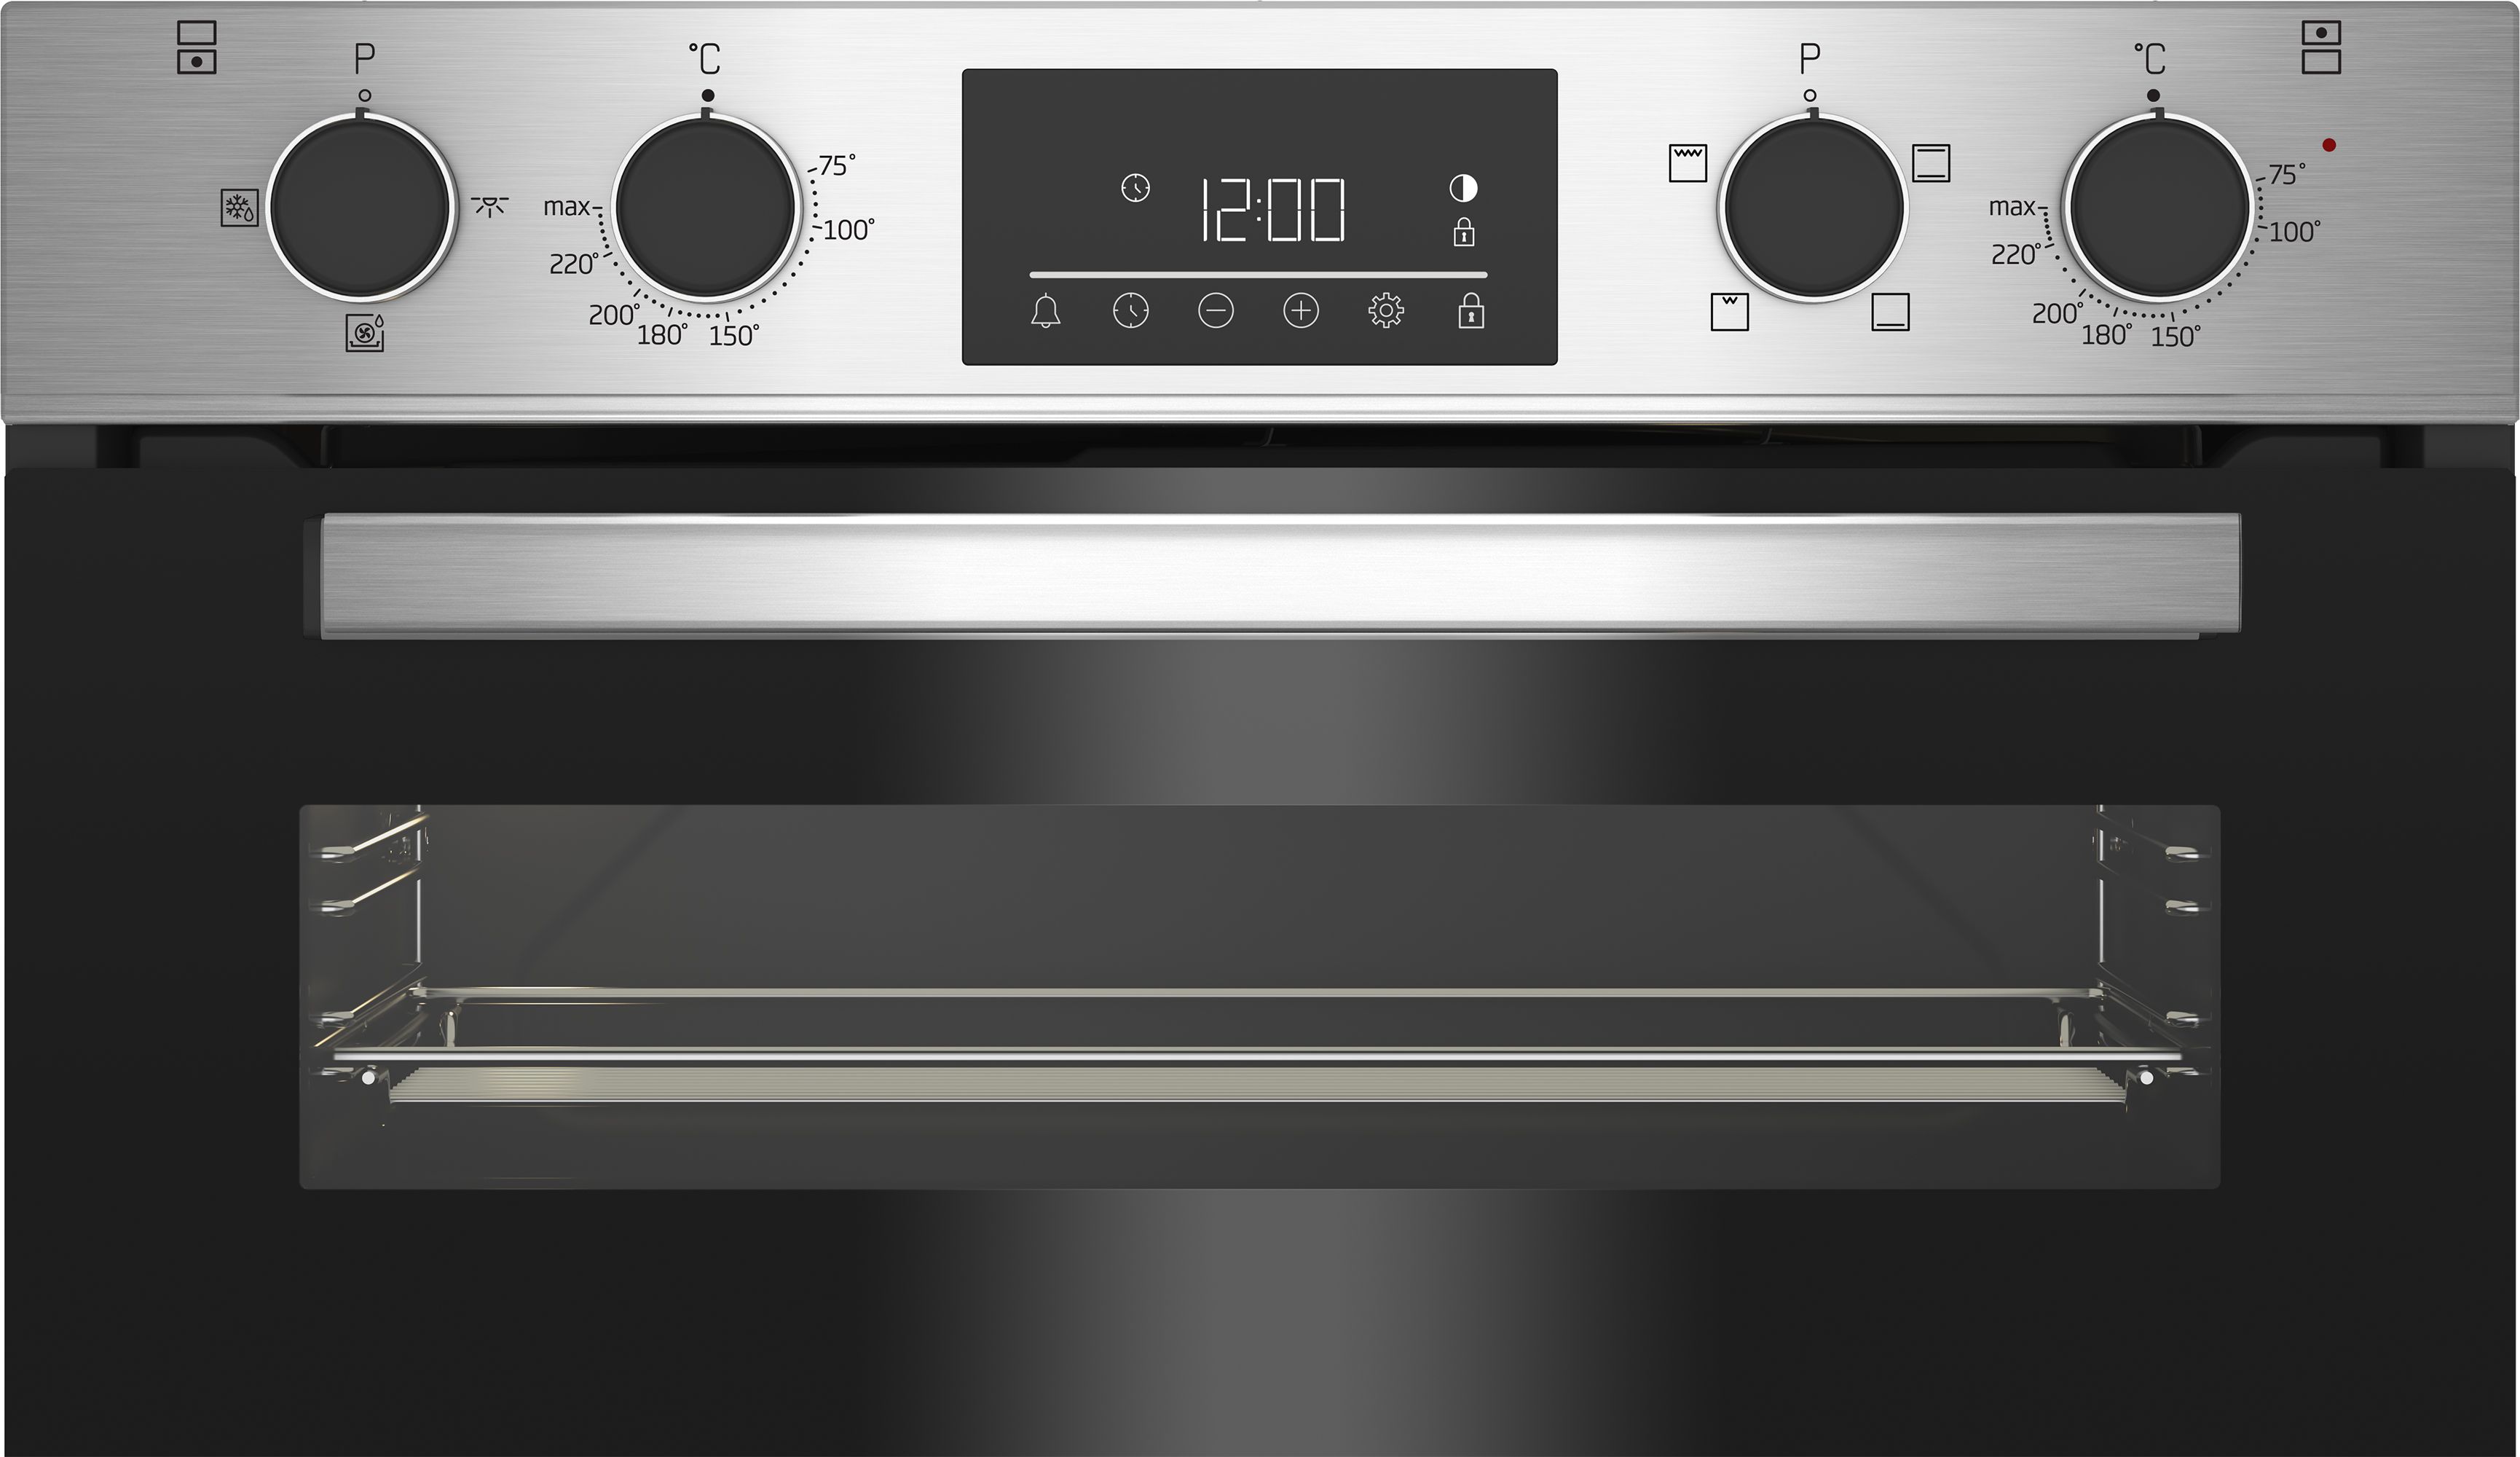 Beko BBTQF22300X Built-in Double Oven - Stainless steel effect